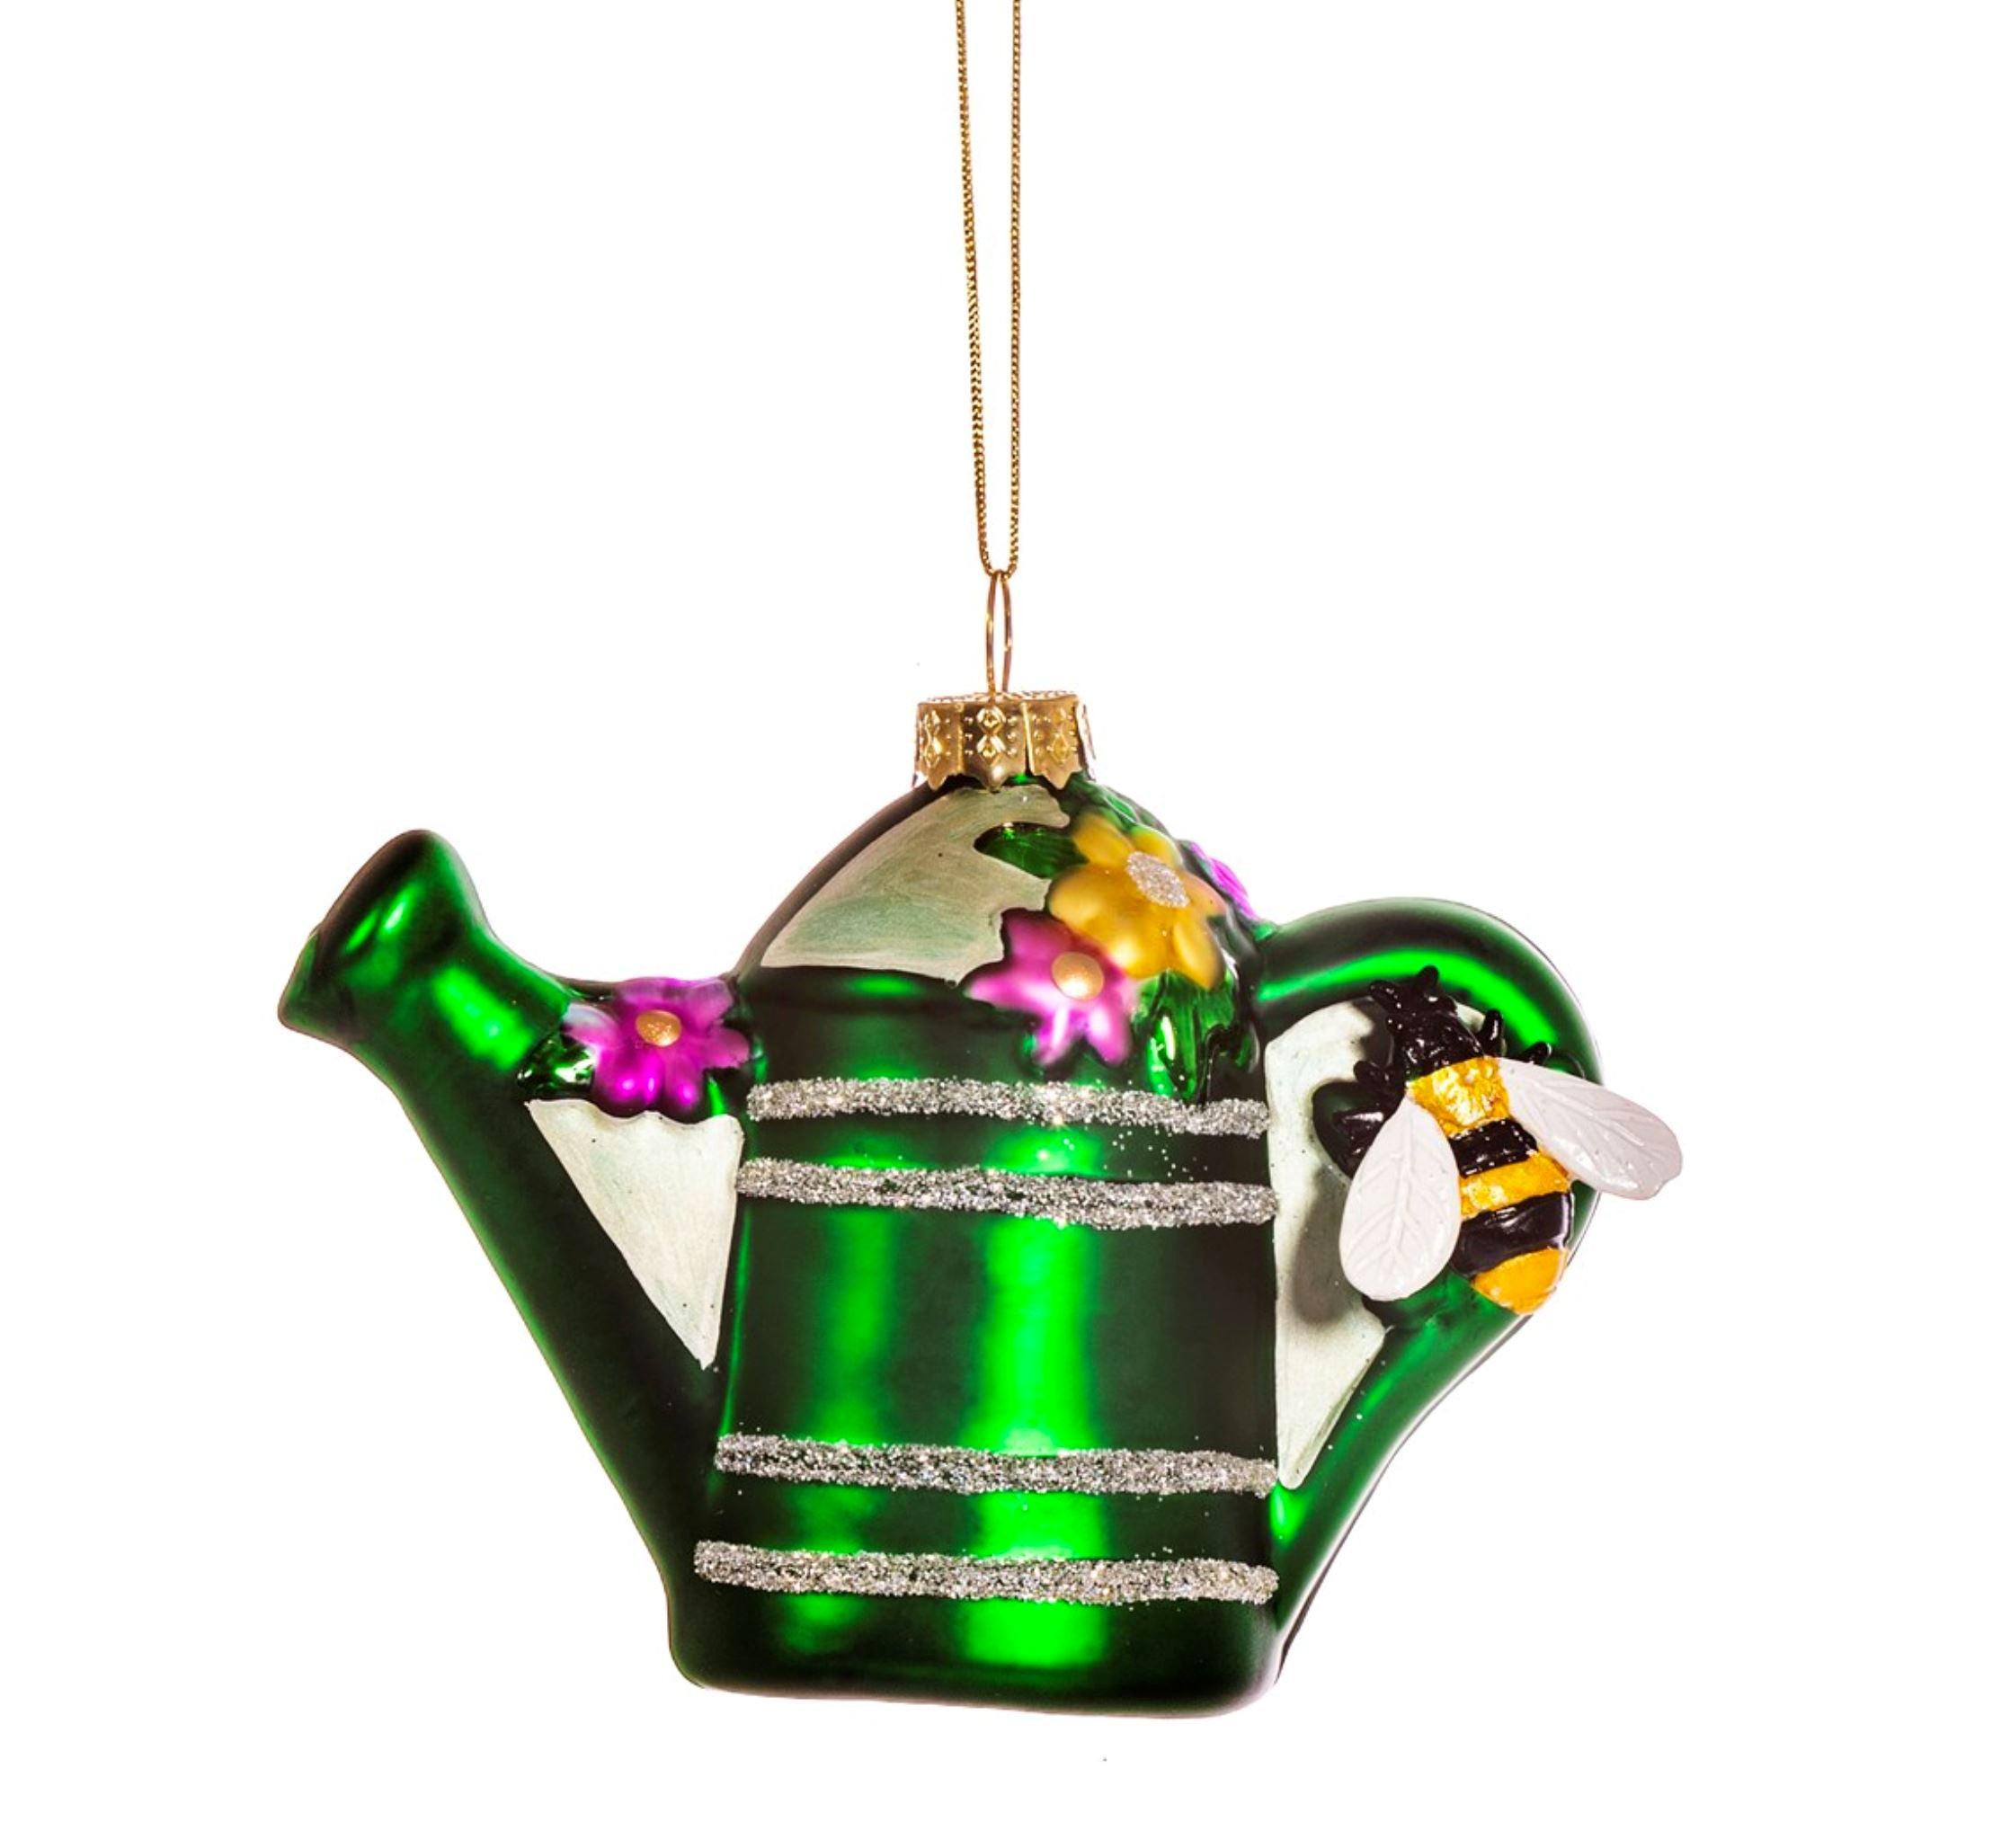 Watering Can Shaped Bauble Christmas Decorations Foxyavenue UK